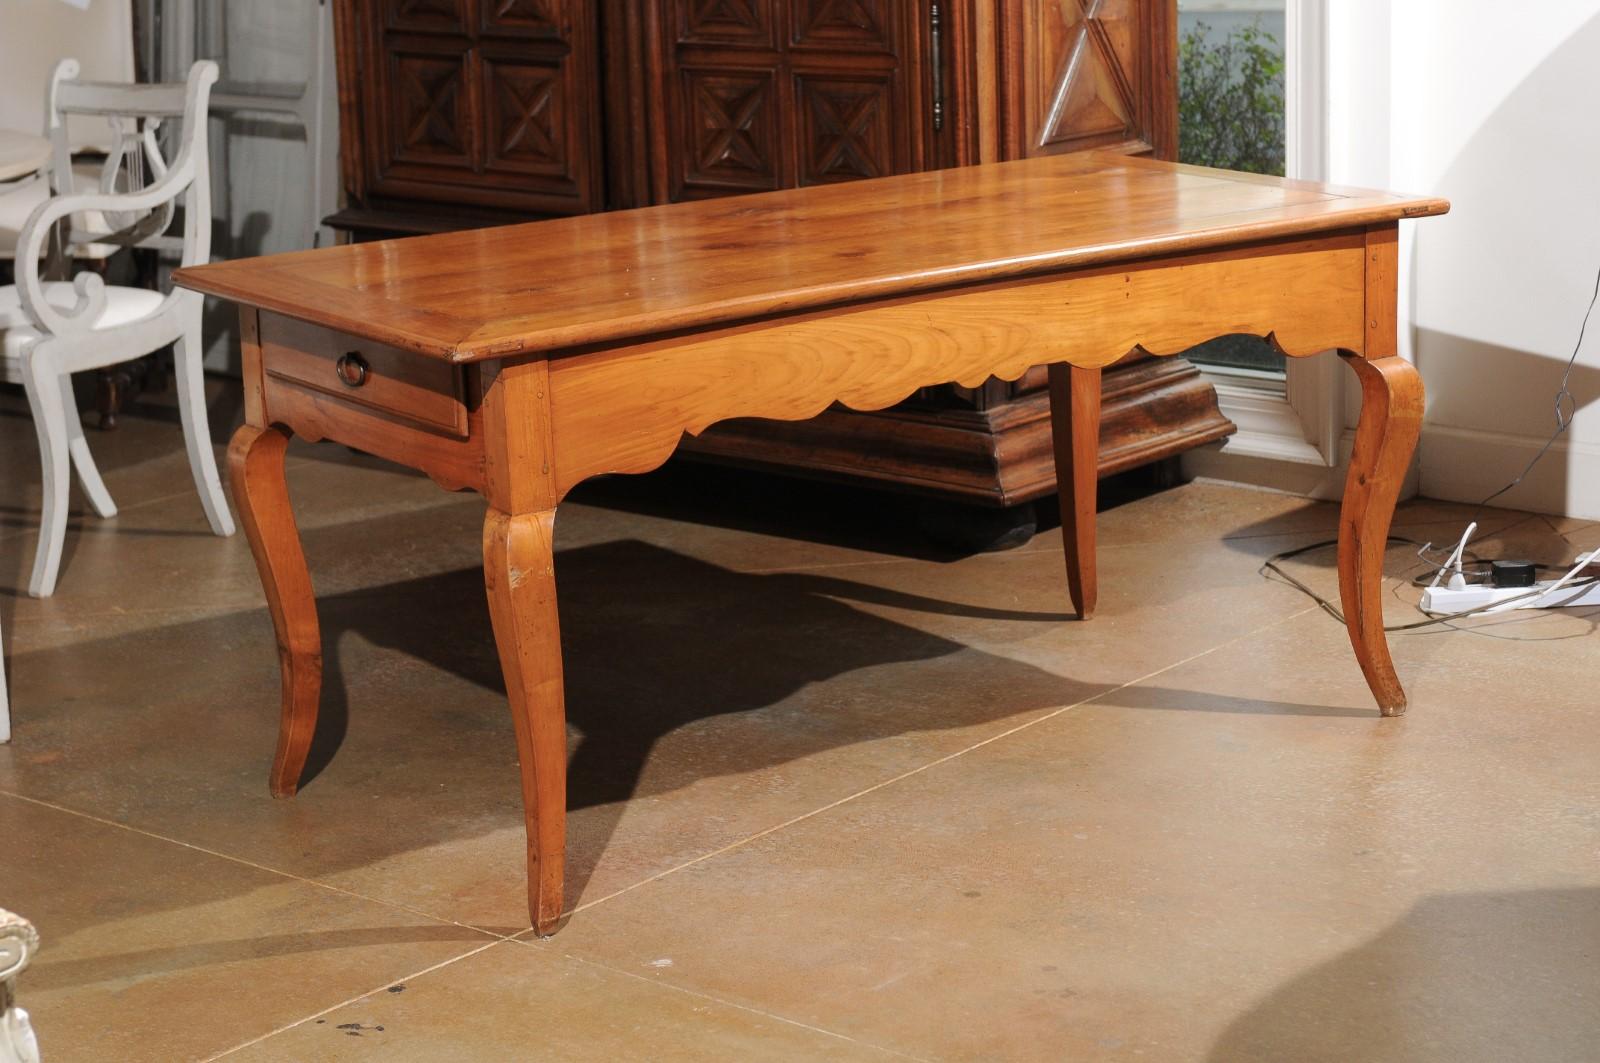 A French Louis XV style cherry office table from the 19th century, with lateral drawer, pull-out, carved apron and cabriole legs. Born in France during the 19th century, this exquisite cherry table features a rectangular planked top sitting above a